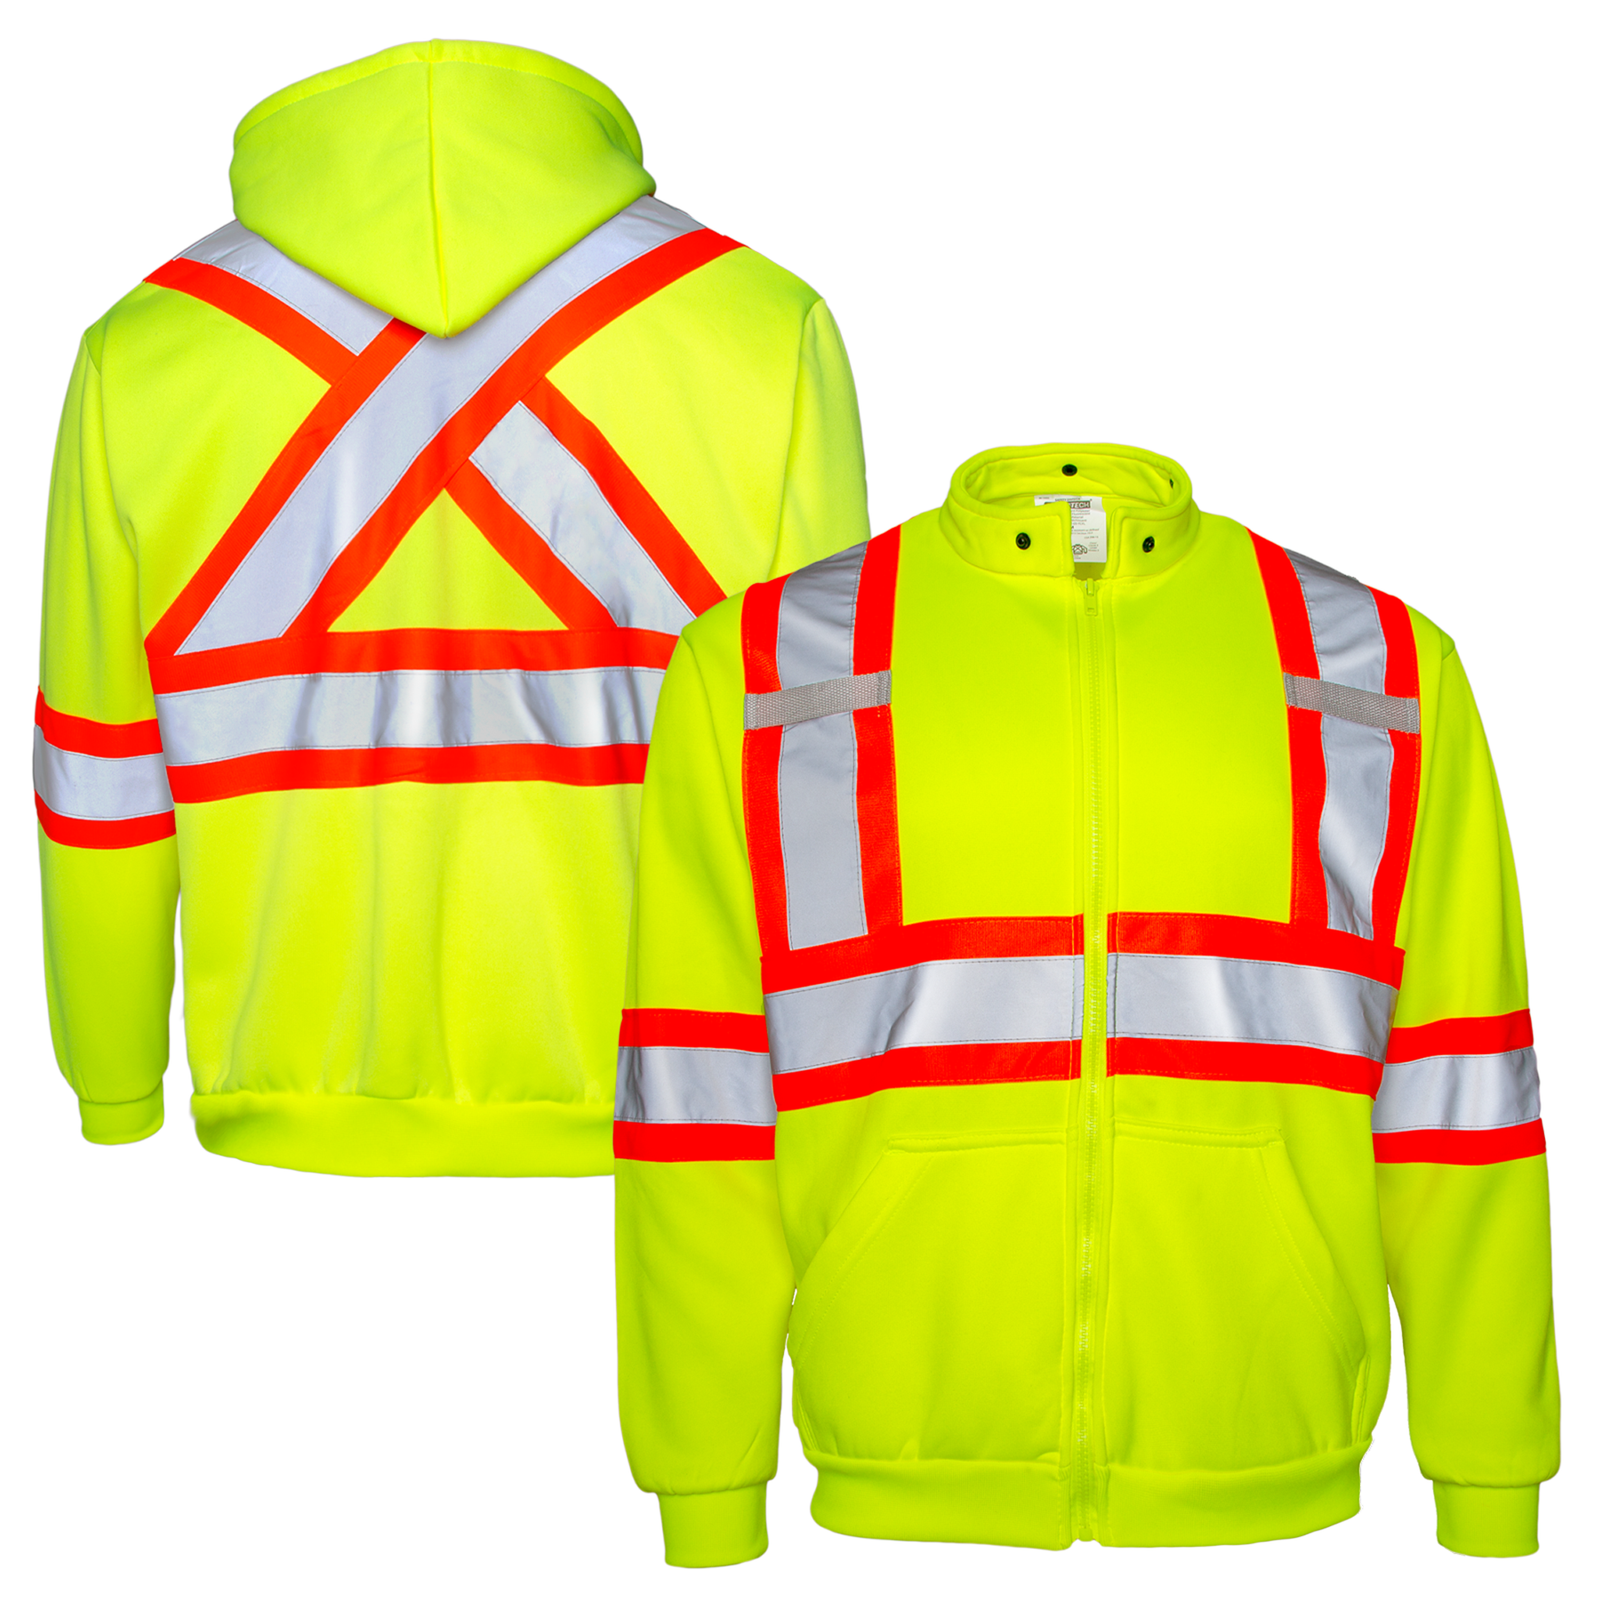 Shows a front view and a back view of the hi-vis two tone yellow safety hooded sweatshirt with reflective stripes. This sweater has reflective and also orange contrasting stripes.